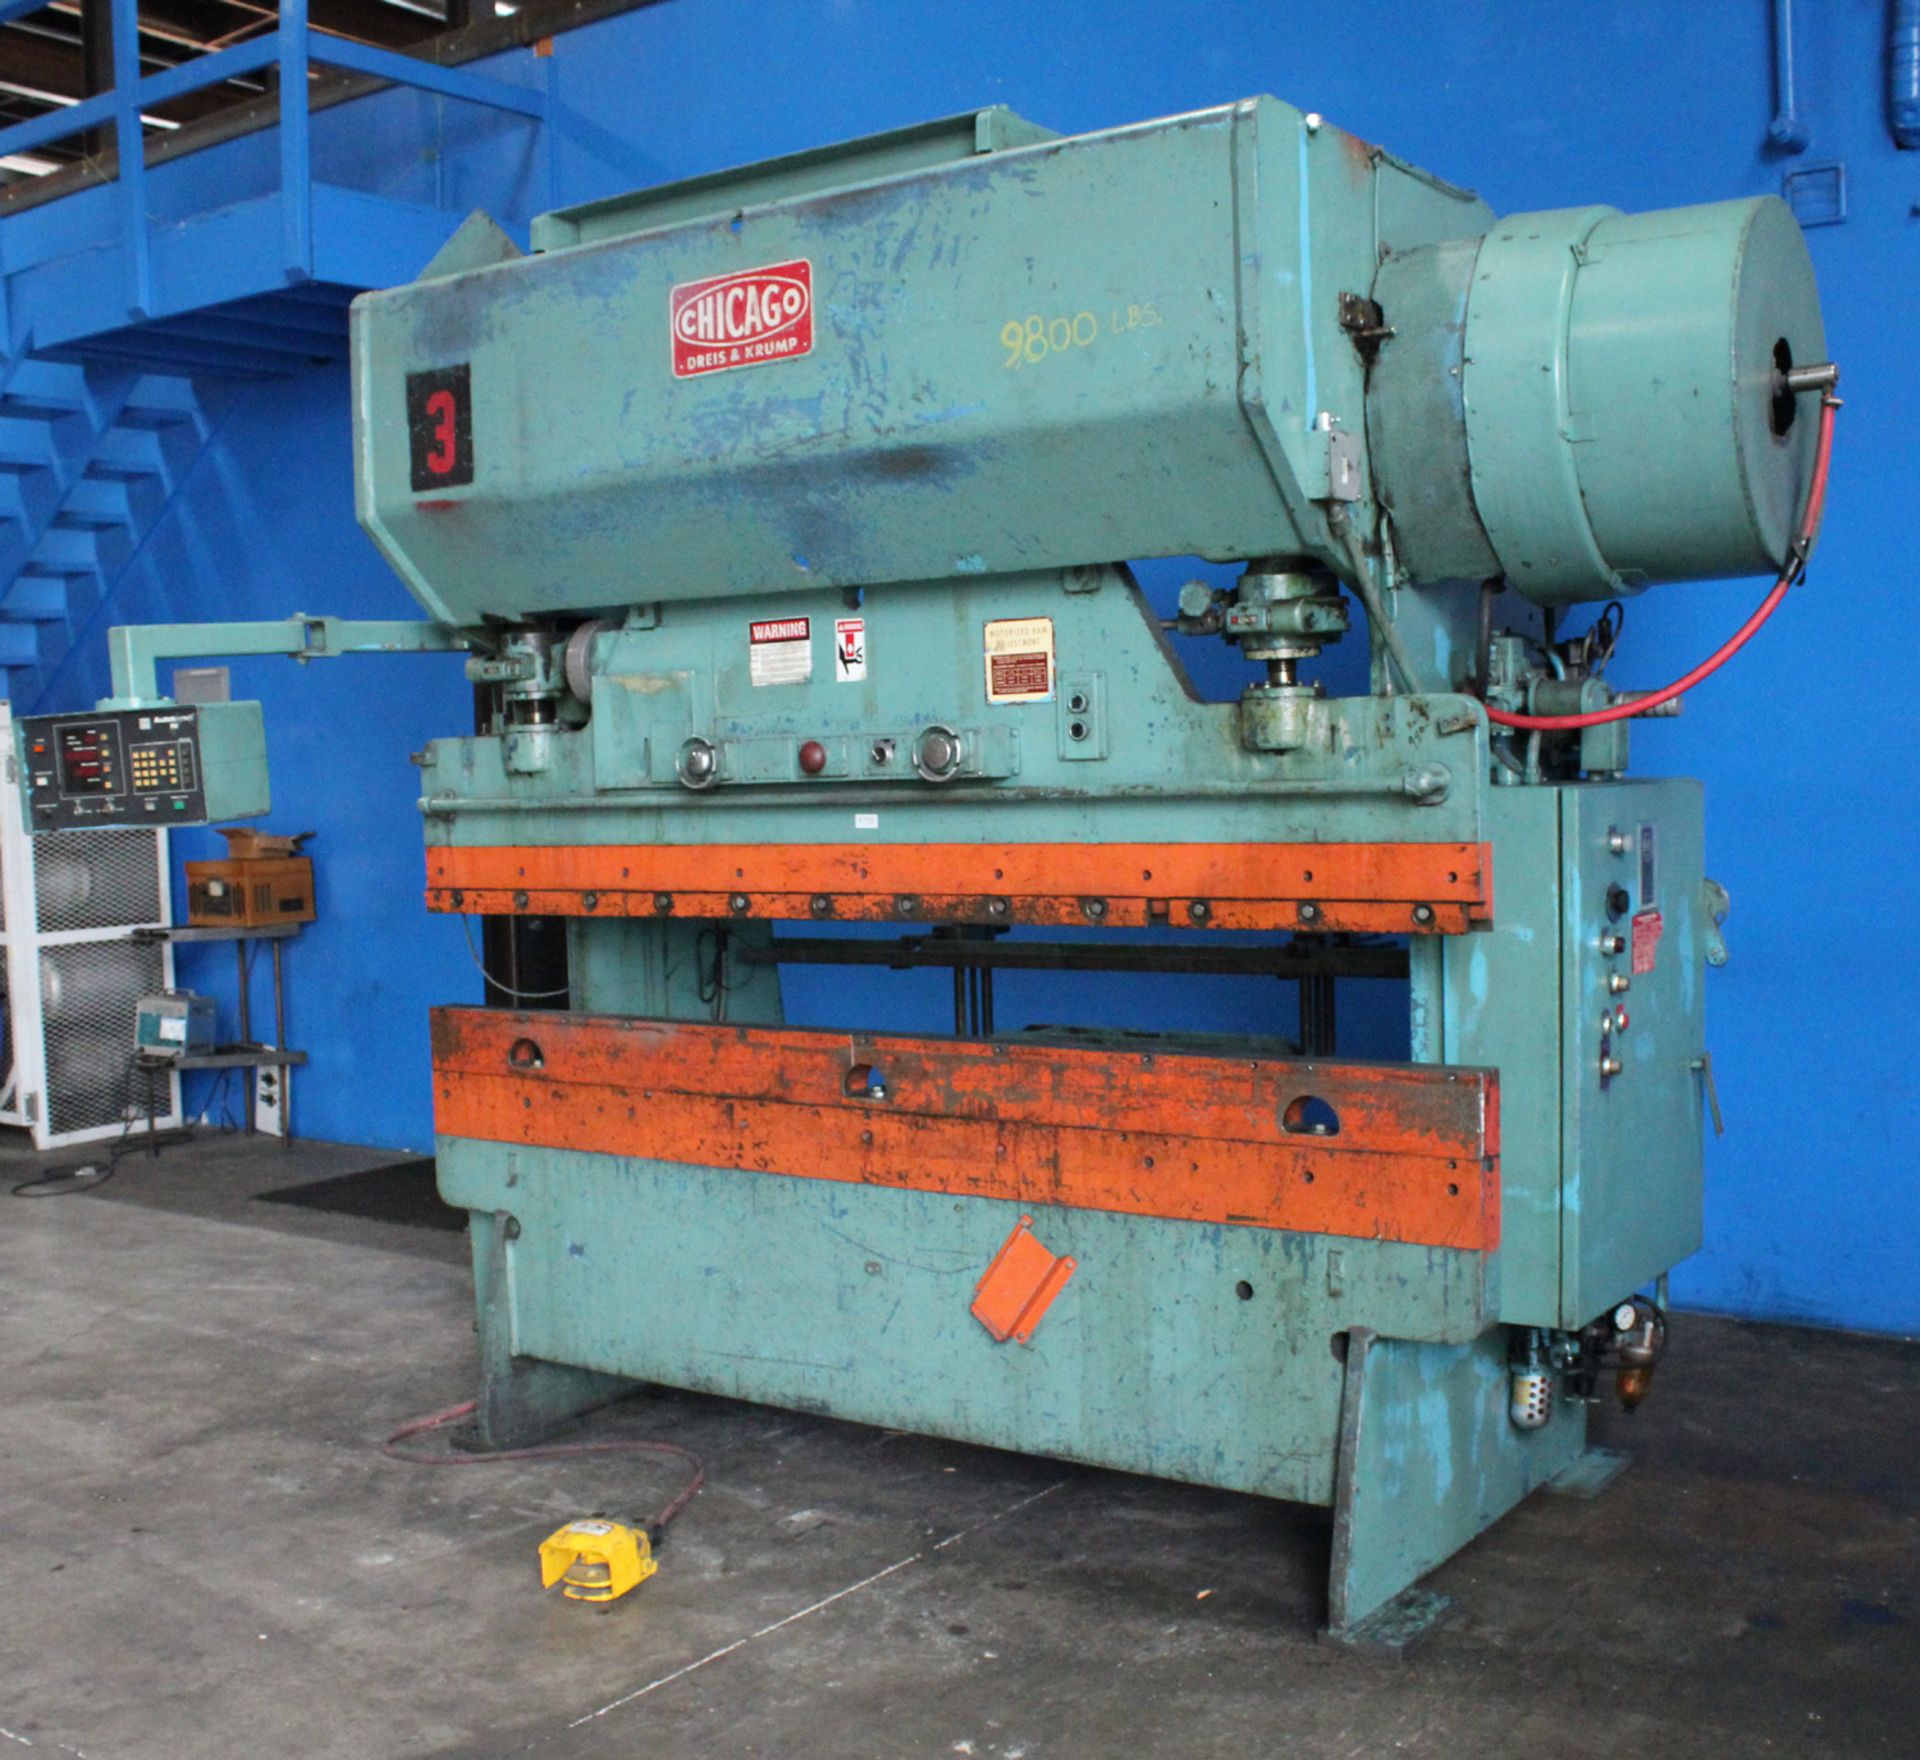 55 Ton x 8' Chicago CNC Mechanical Air Clutch Press Brake, Mdl: 68B, S/N: L-19932, Located In: - Image 2 of 8